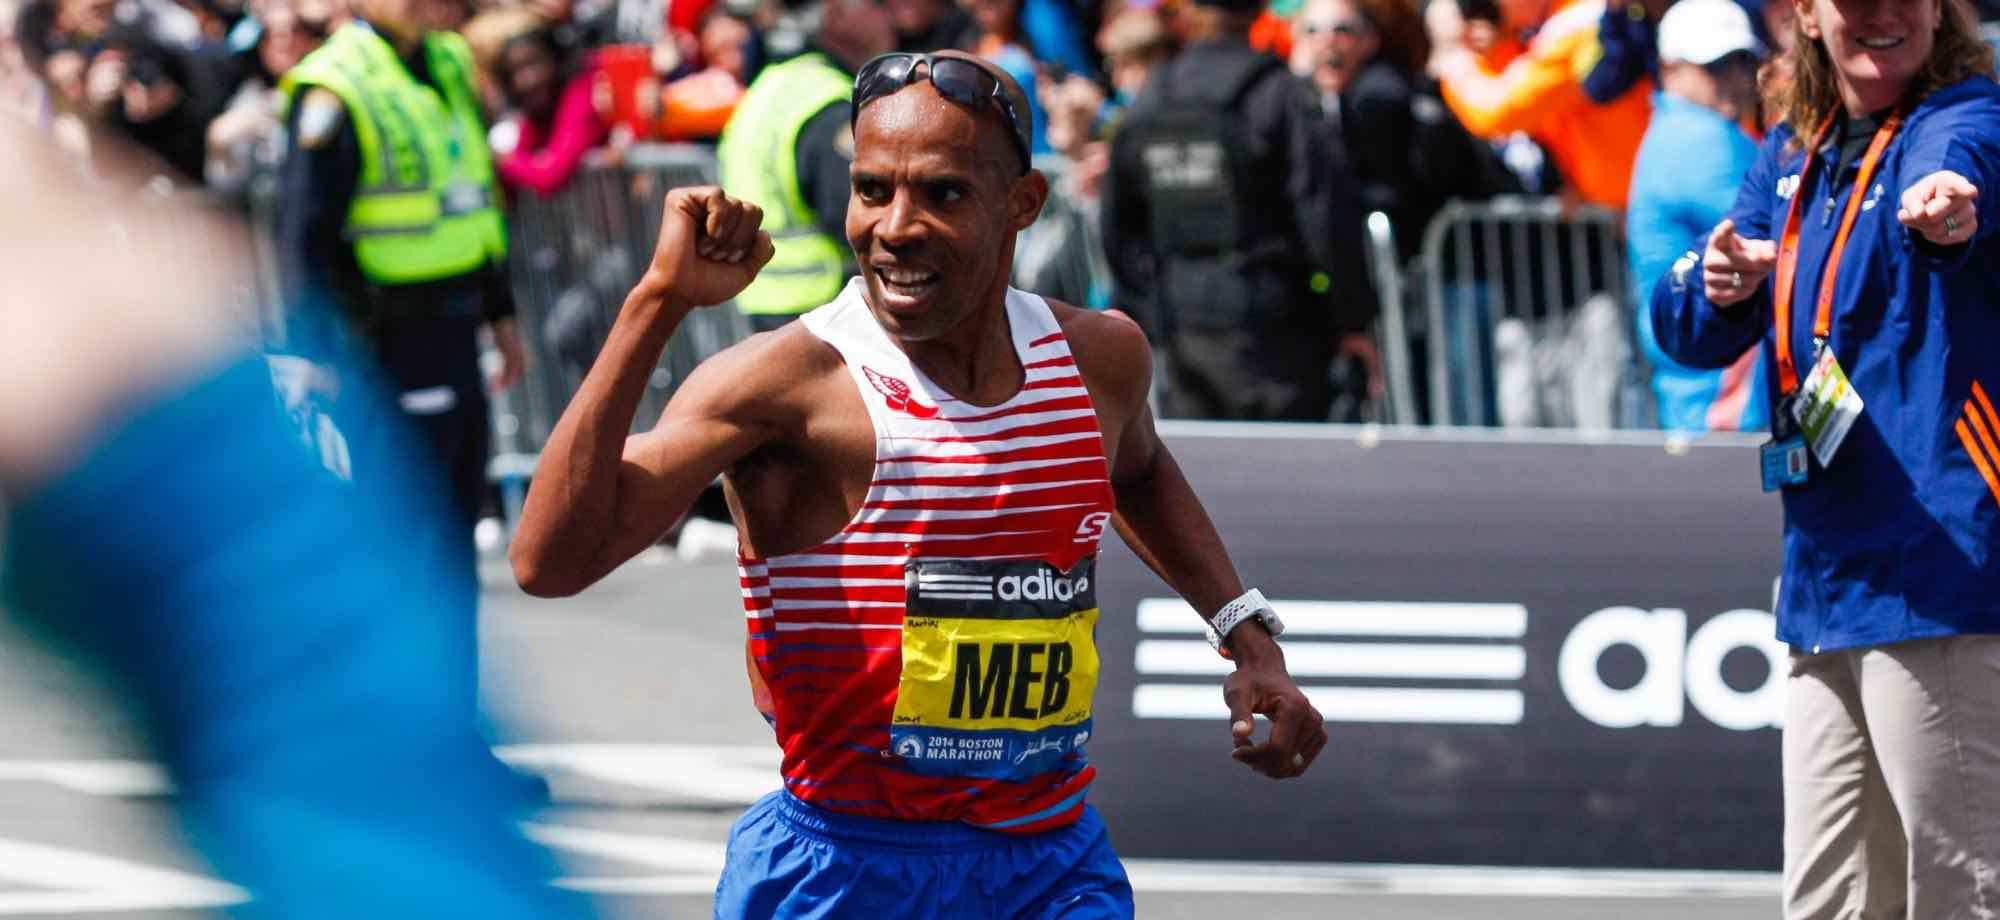 4x Olympian Meb Keflezighi on Energy and Recovery